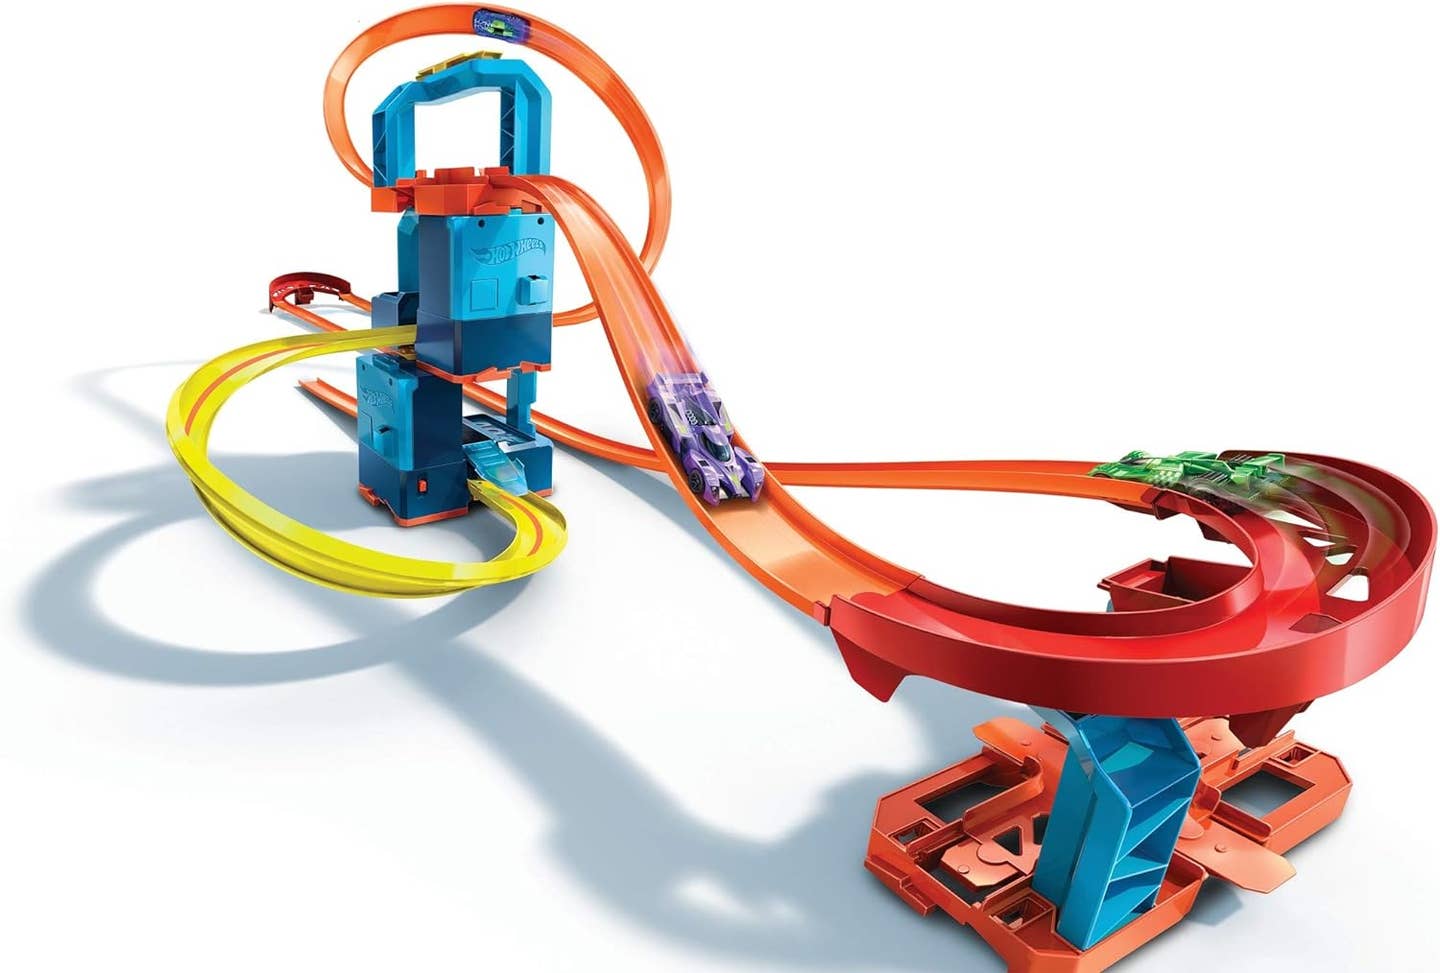 Hot Wheels Track Builder Unlimited Ultra Stackable Booster Kit Motorized Set 5 Plus Configurations ($36.99)